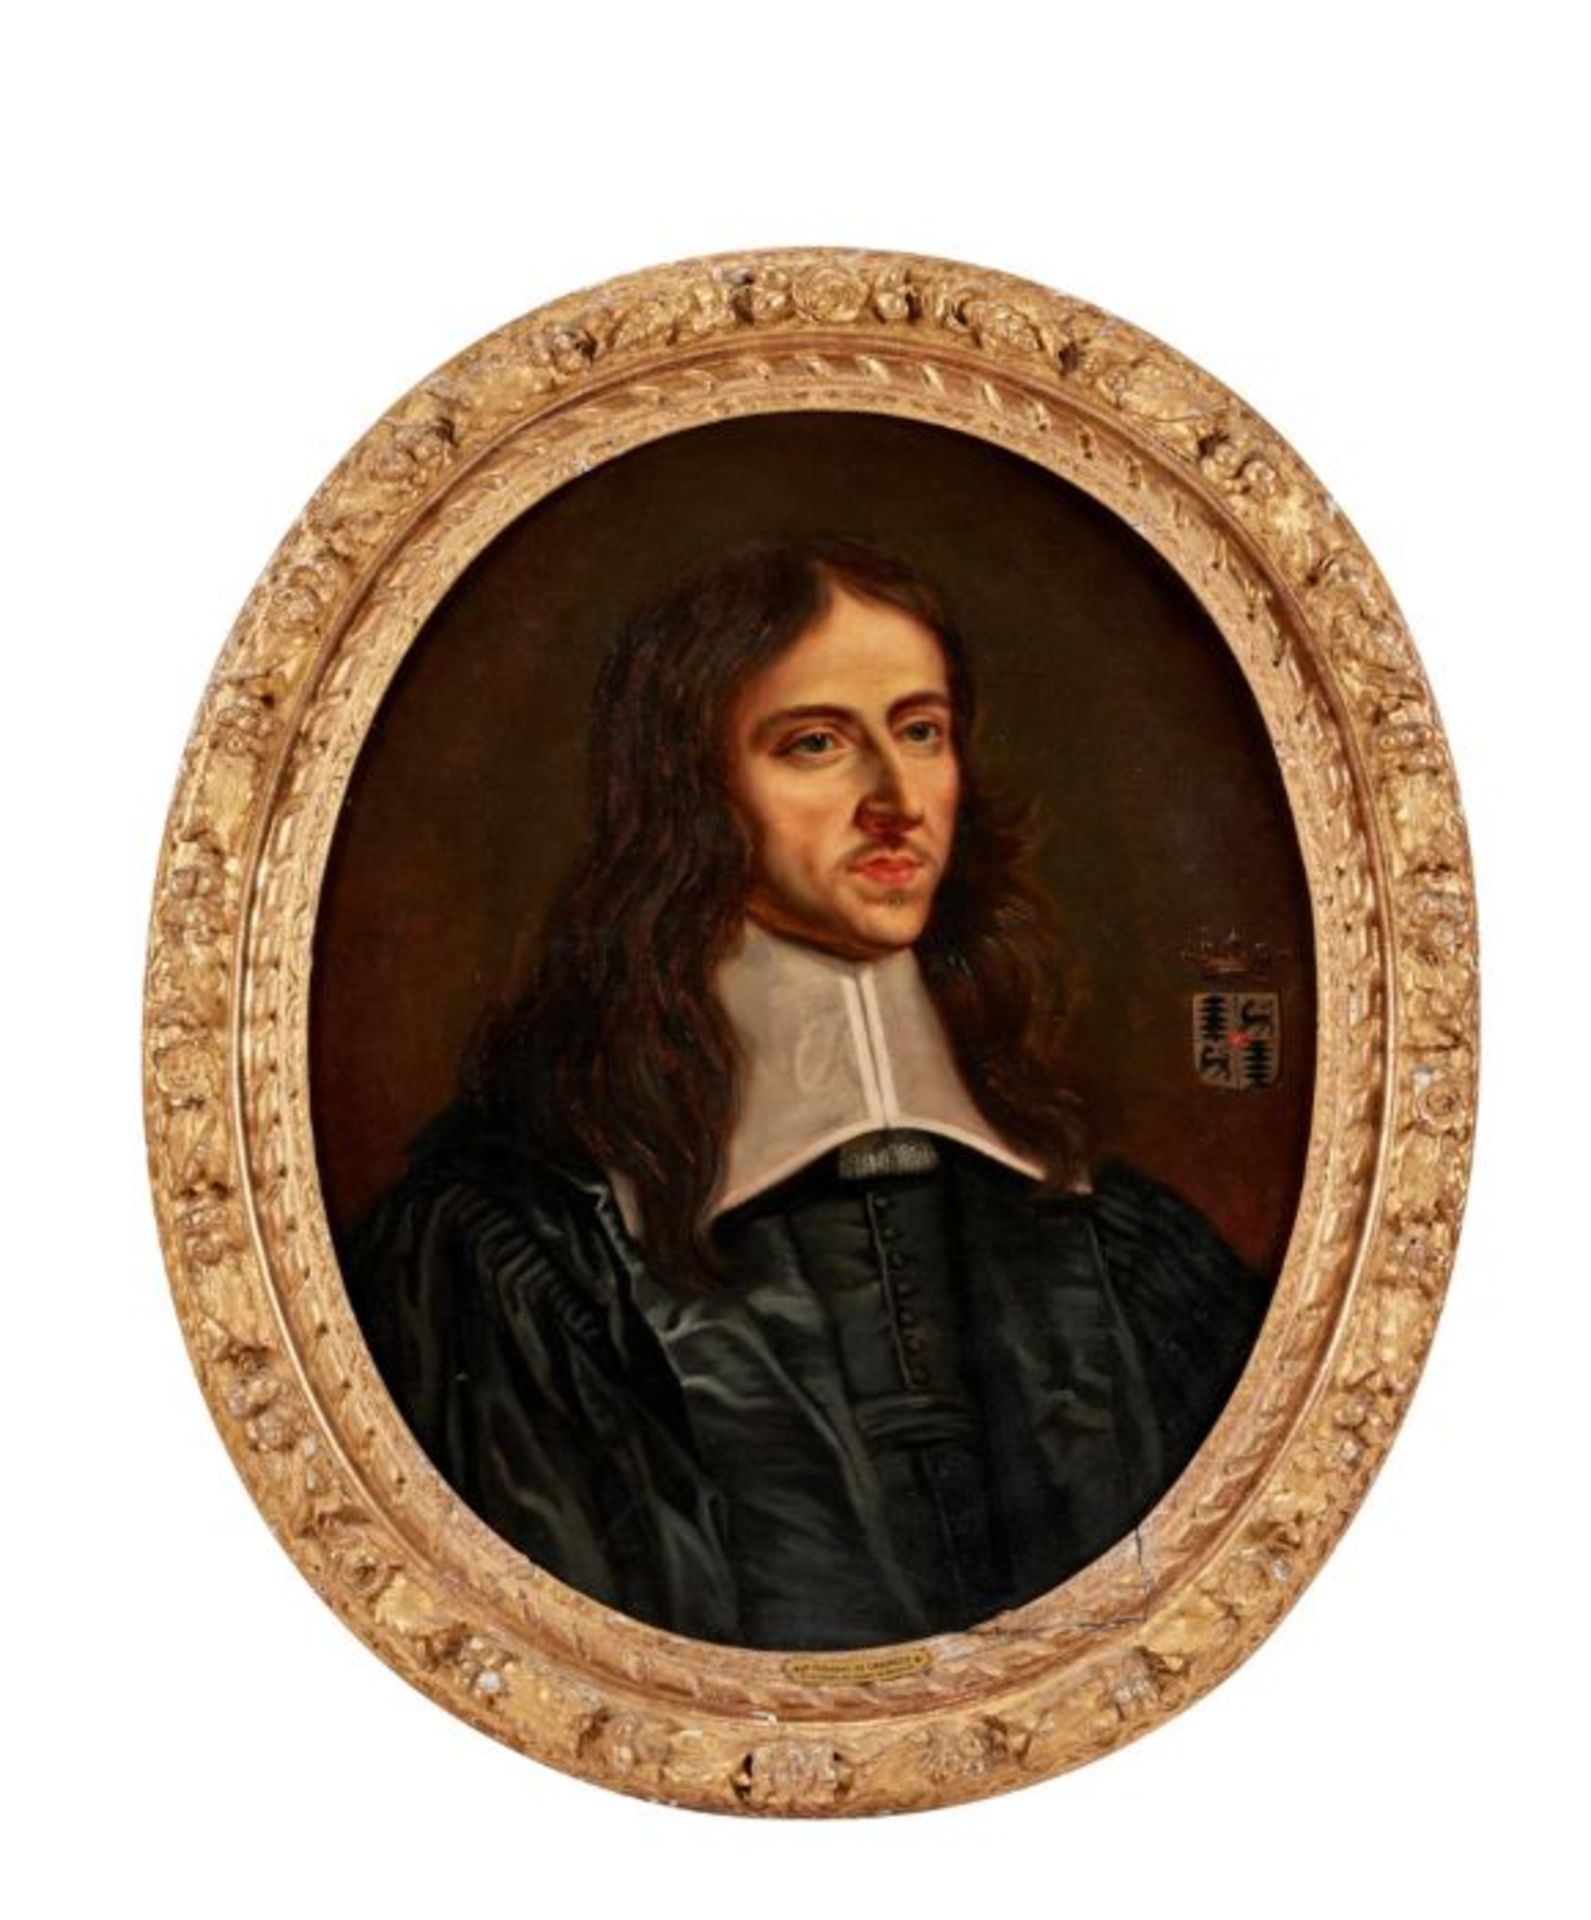 19th century French School, An oval portrait of a man in 17th century dress - Image 2 of 5